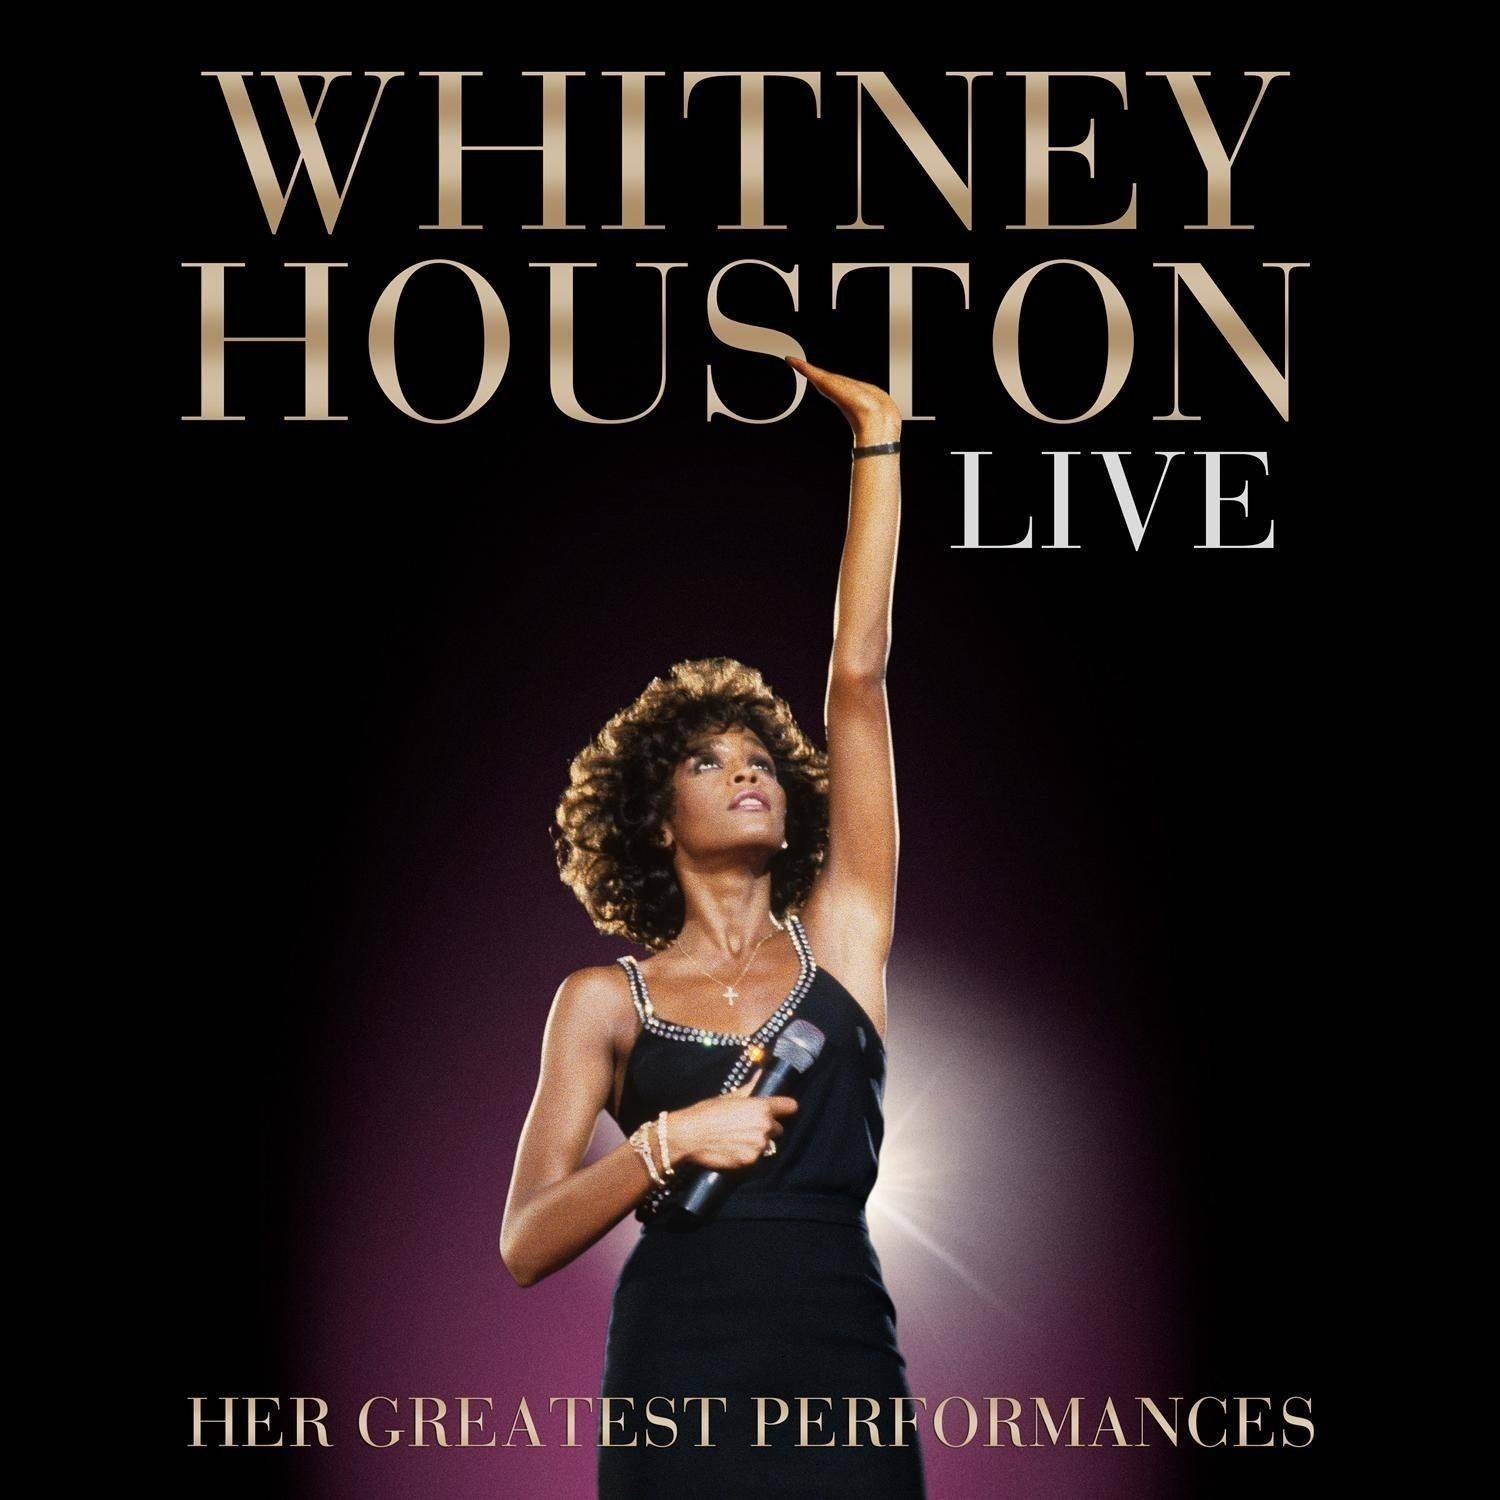 Live : Her Greatest Performances